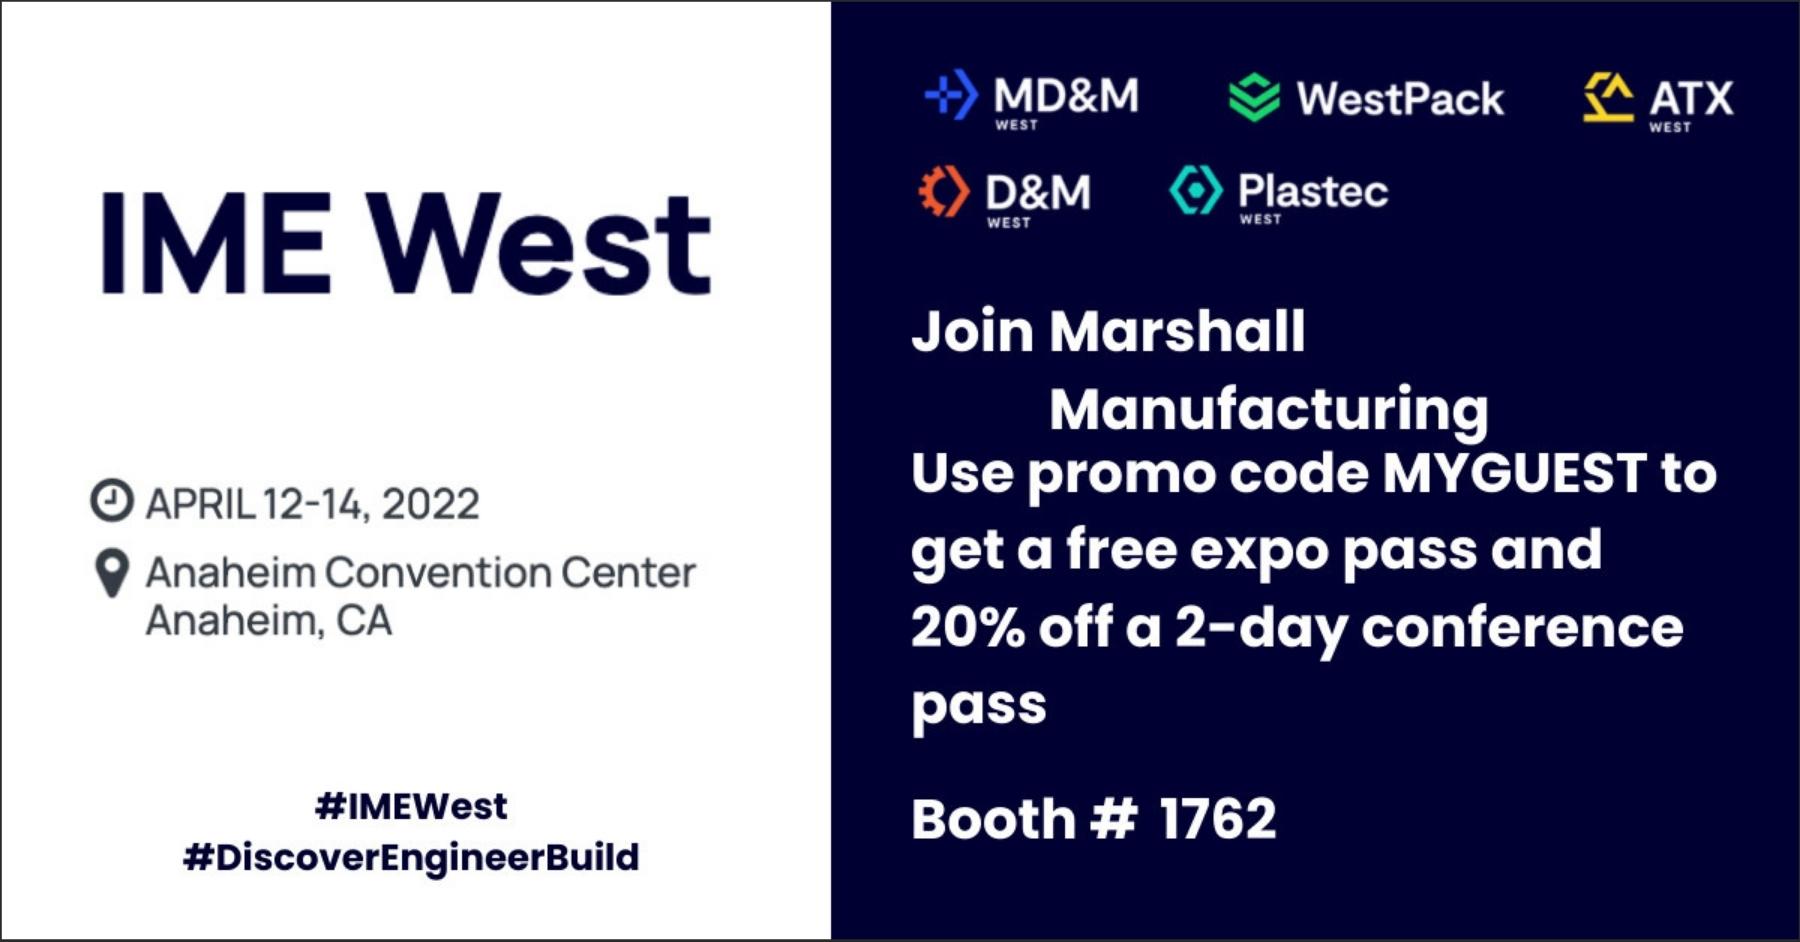 REGISTER NOW for Discounted Tickets to MD&M West 2022 Marshall